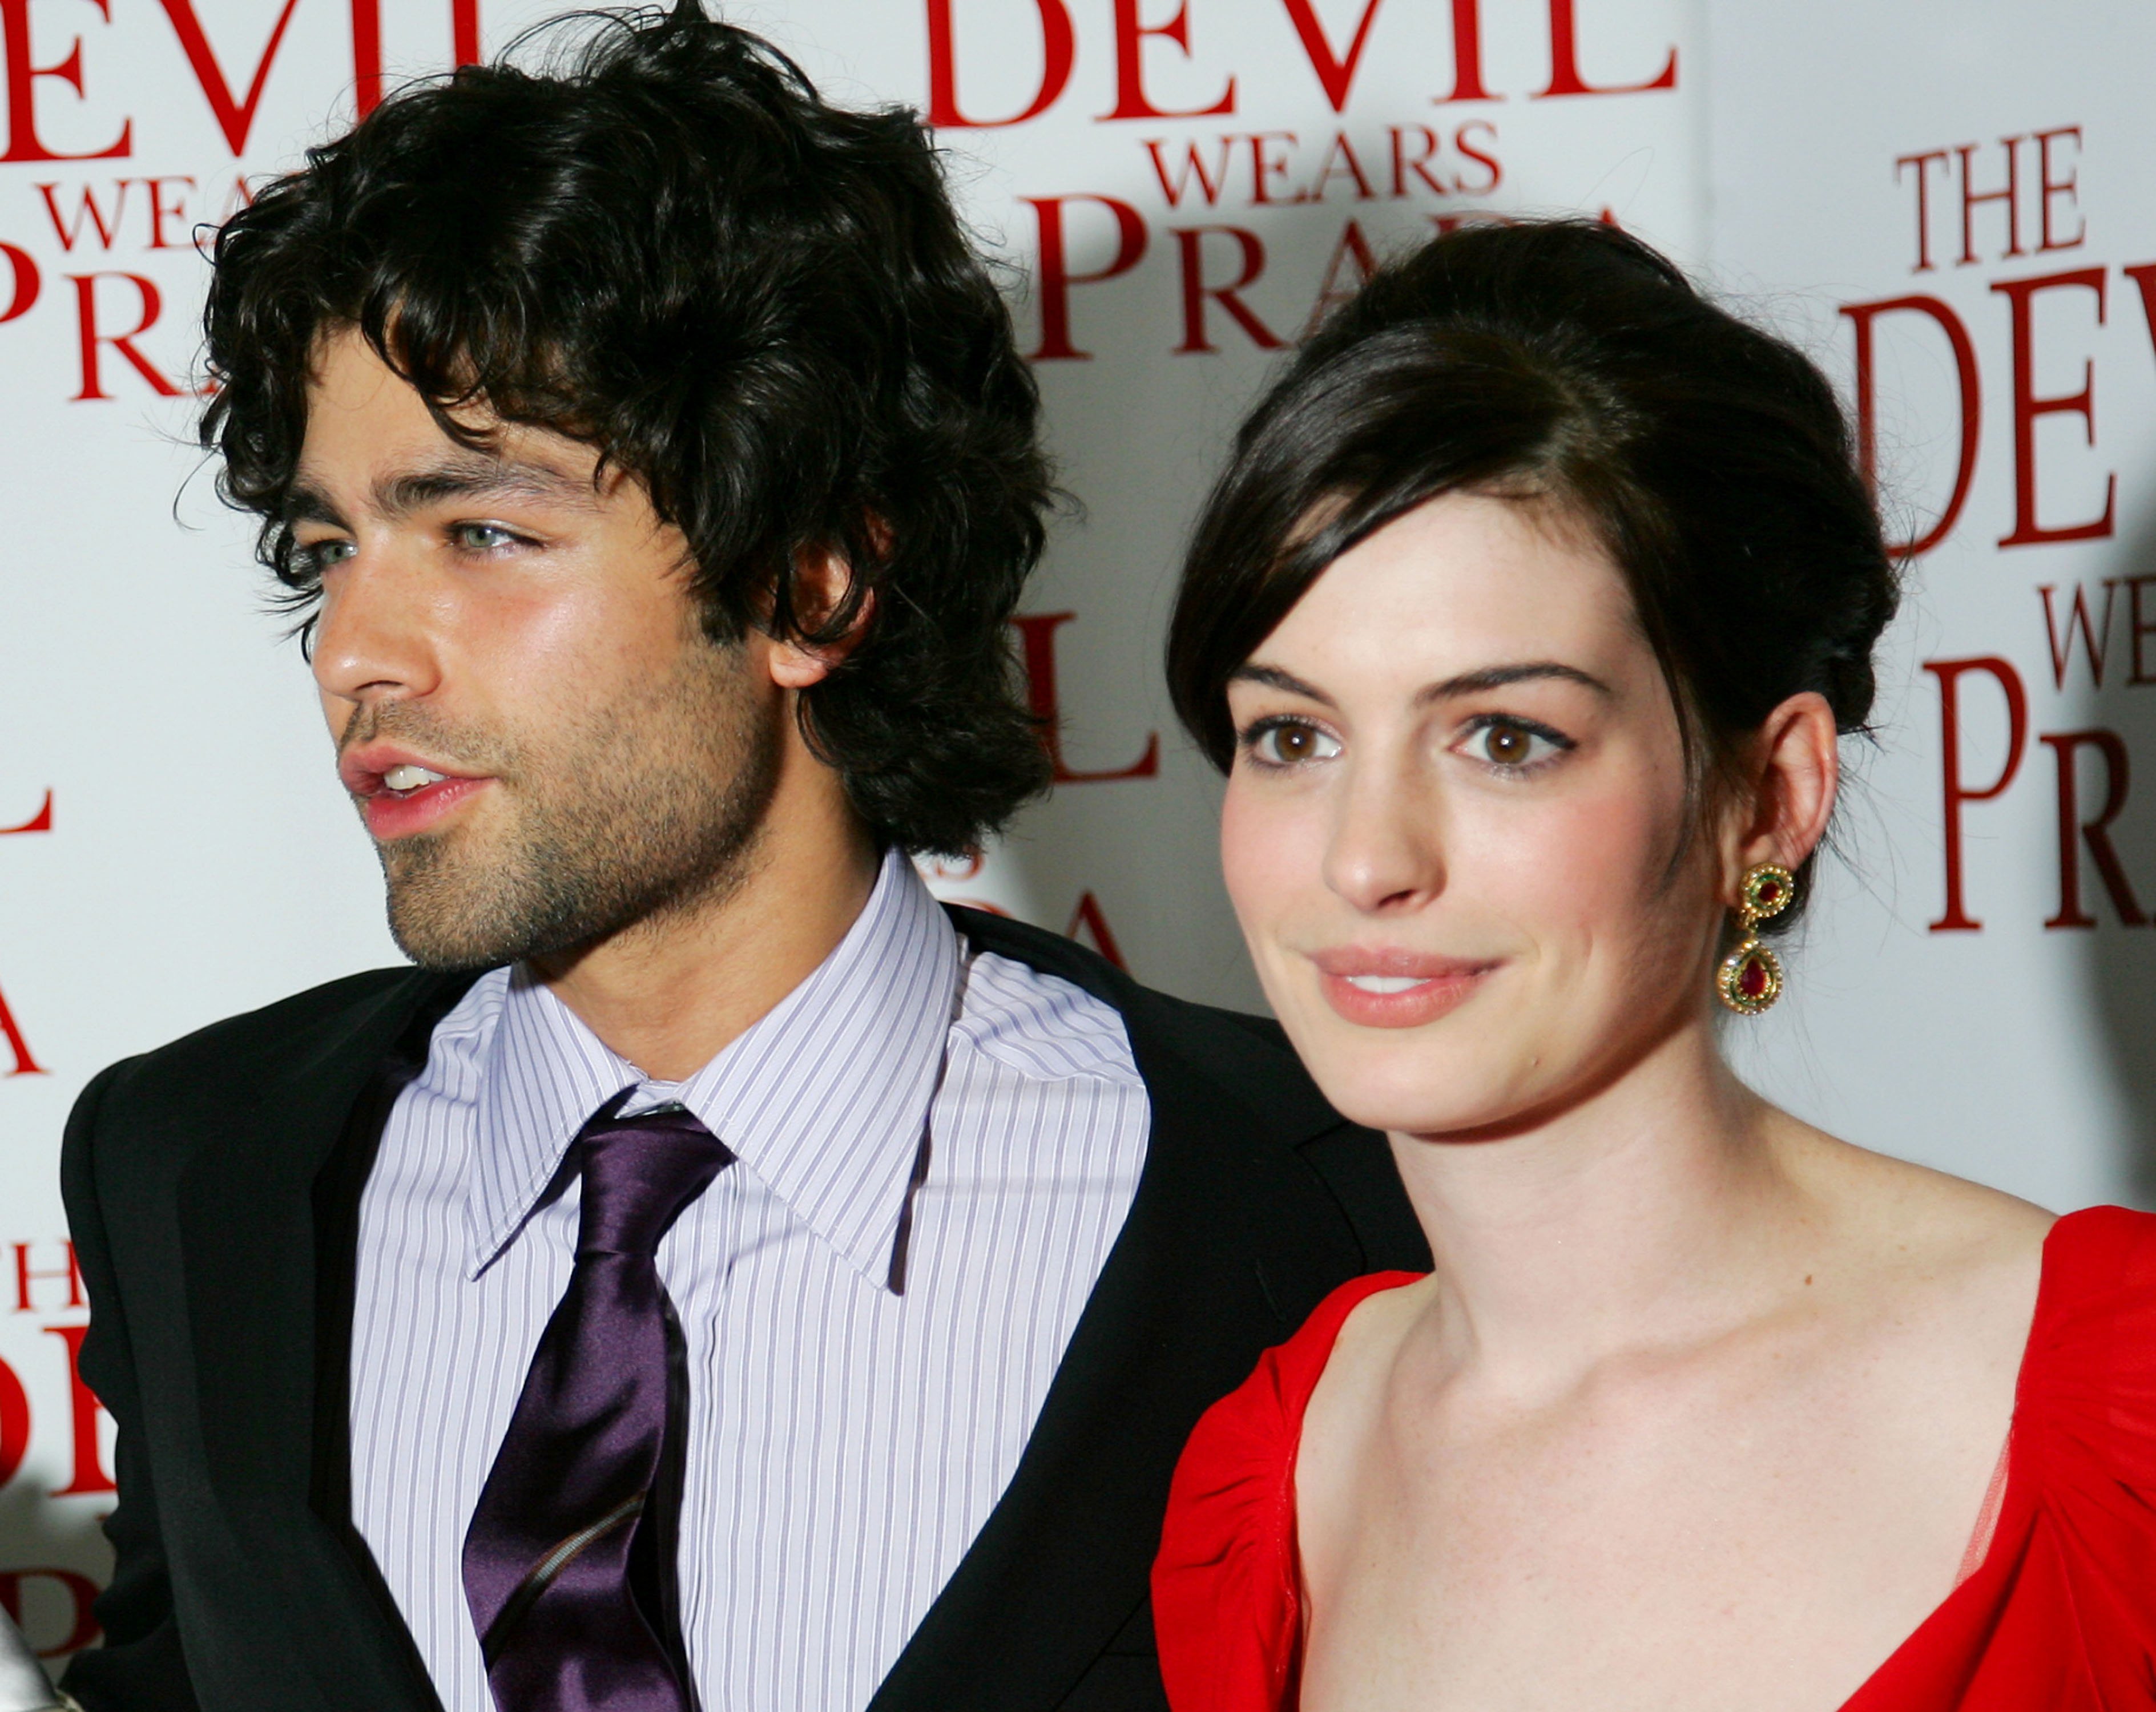 'The Devil Wears Prada' actors Adrian Grenier and Anne Hathaway smiling and posing at movie's premiere. 